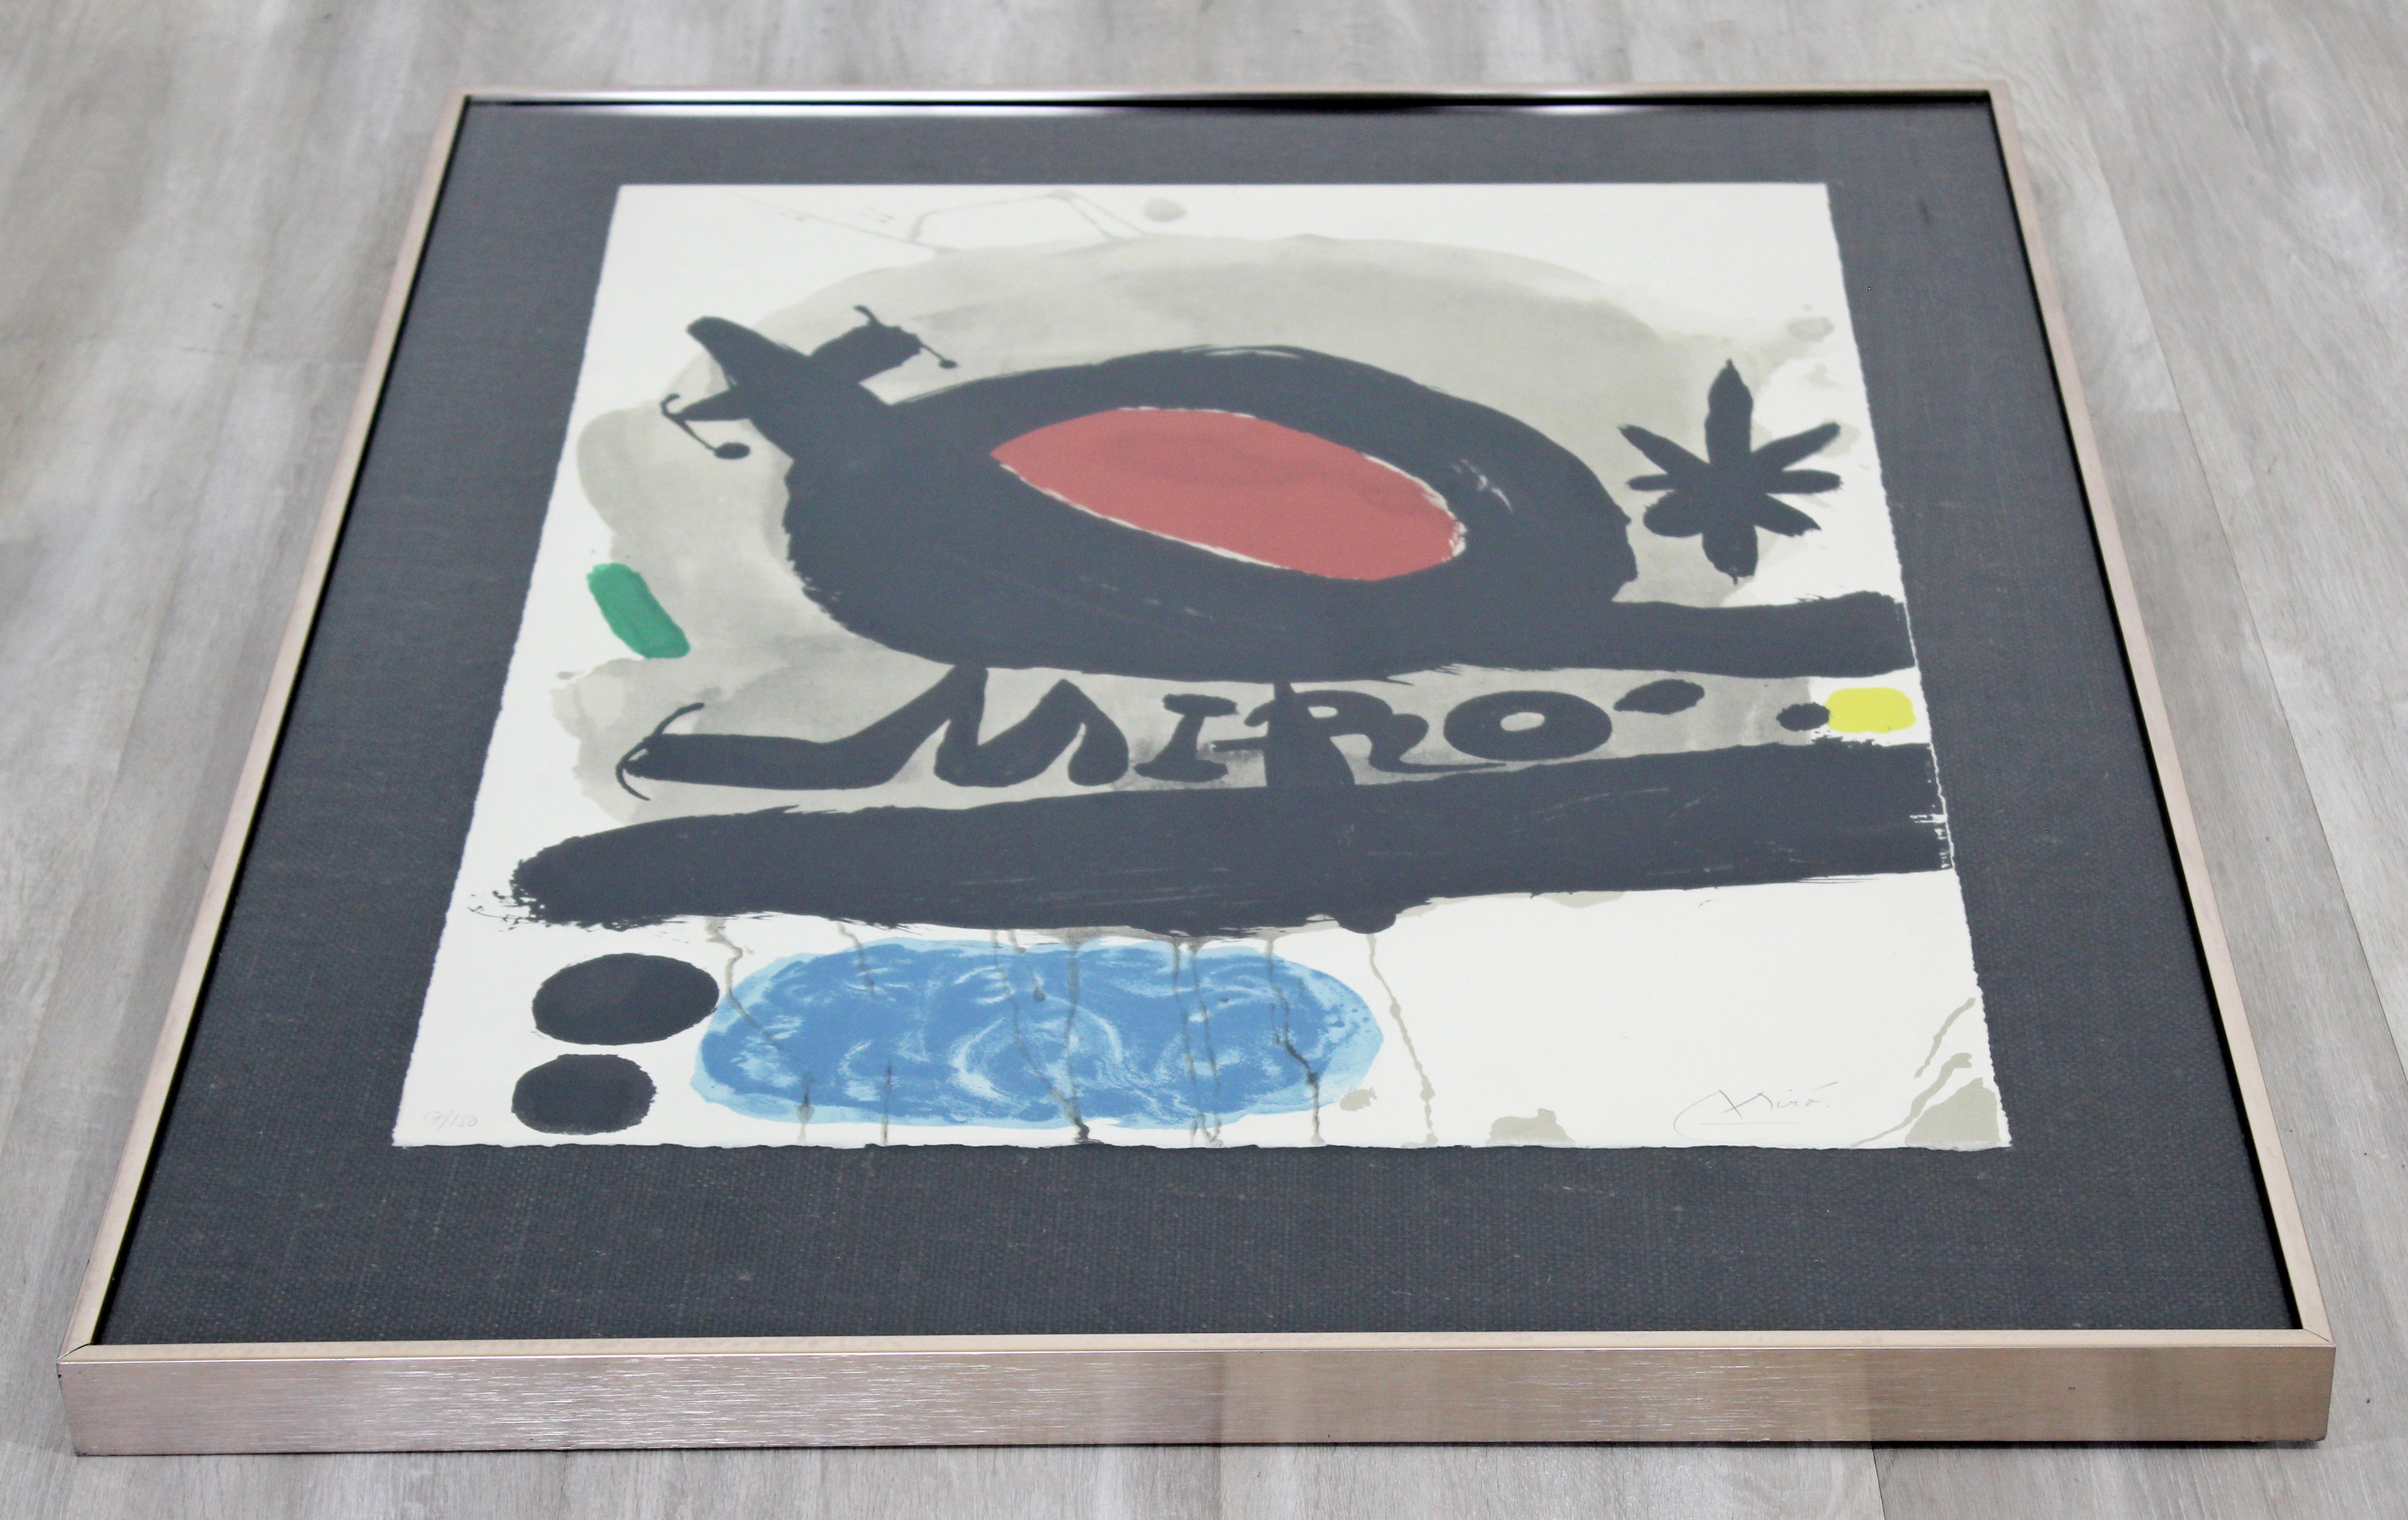 Spanish Mid-Century Modern Joan Miró Framed Signed Lithograph L'Oiseau Solaire Lunaire67